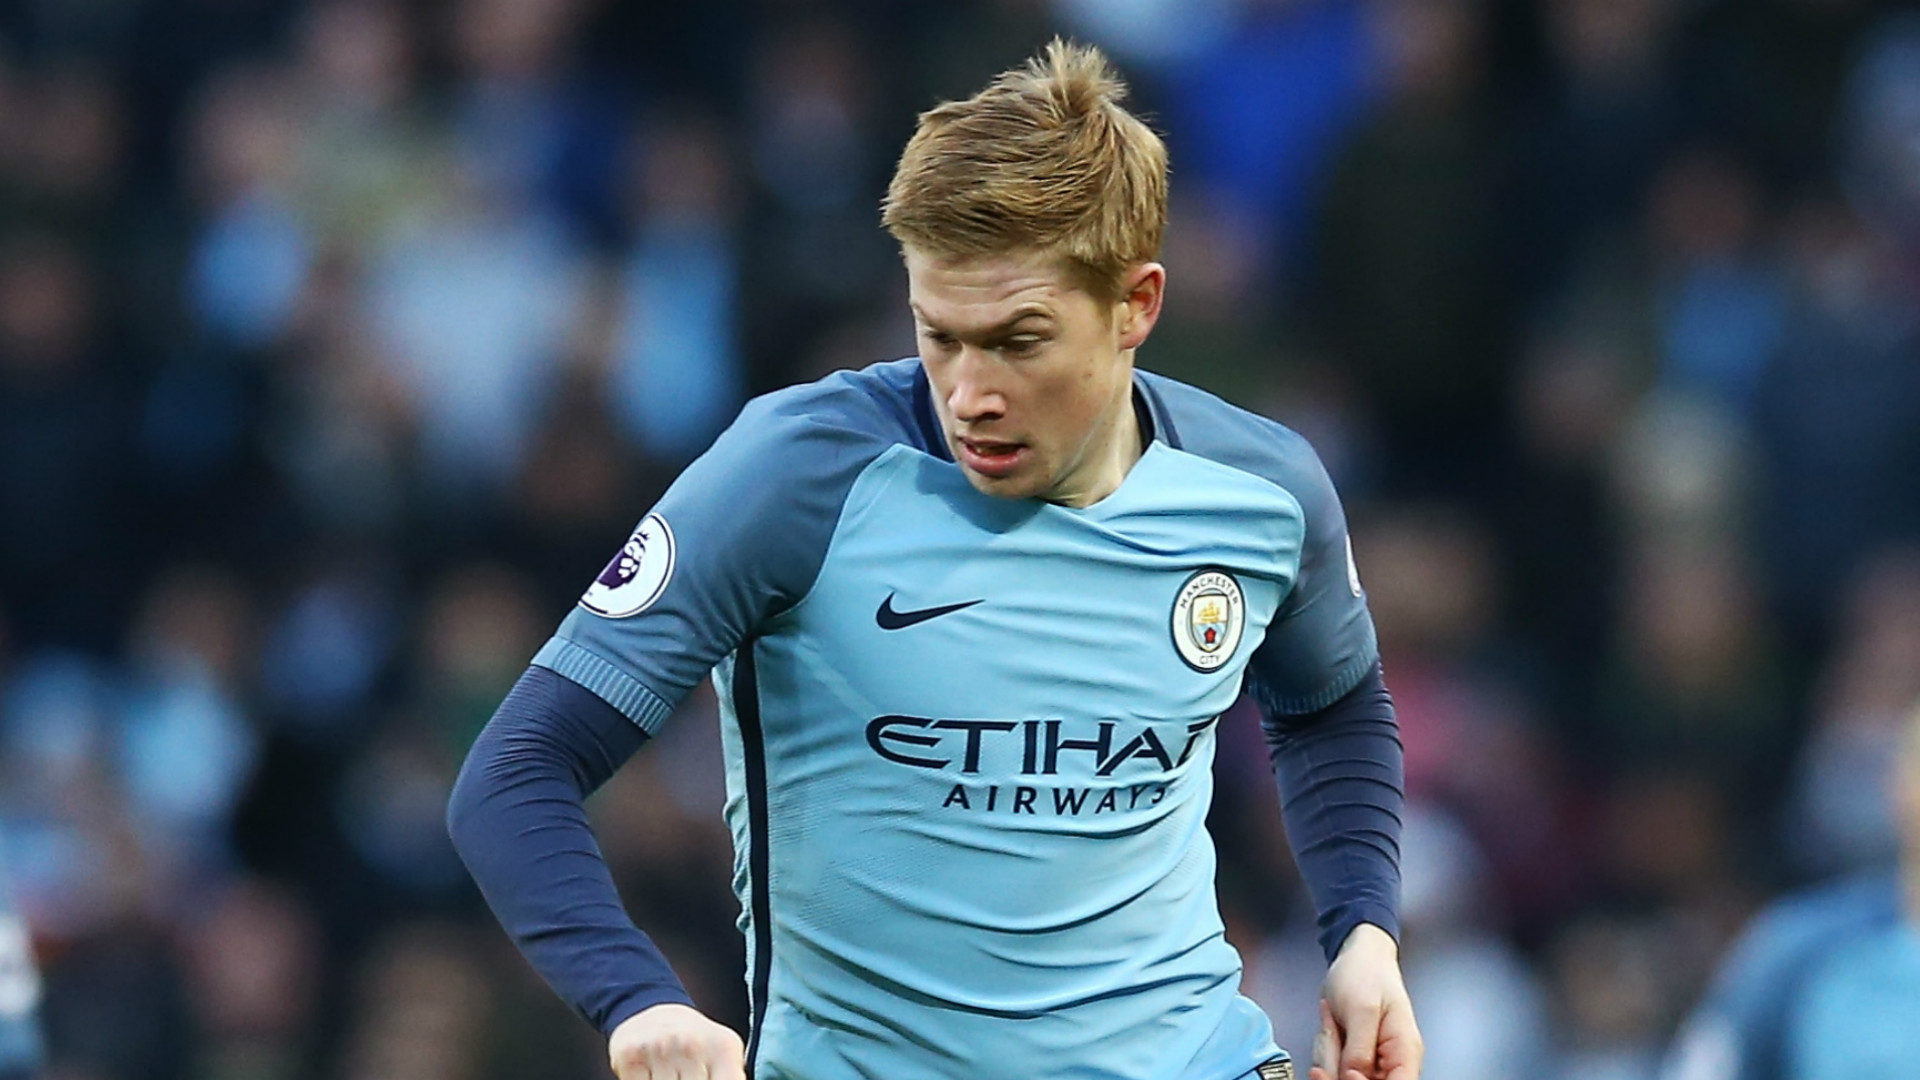 Kevin De Bruyne HD Wallpaper Image Photos Pictures